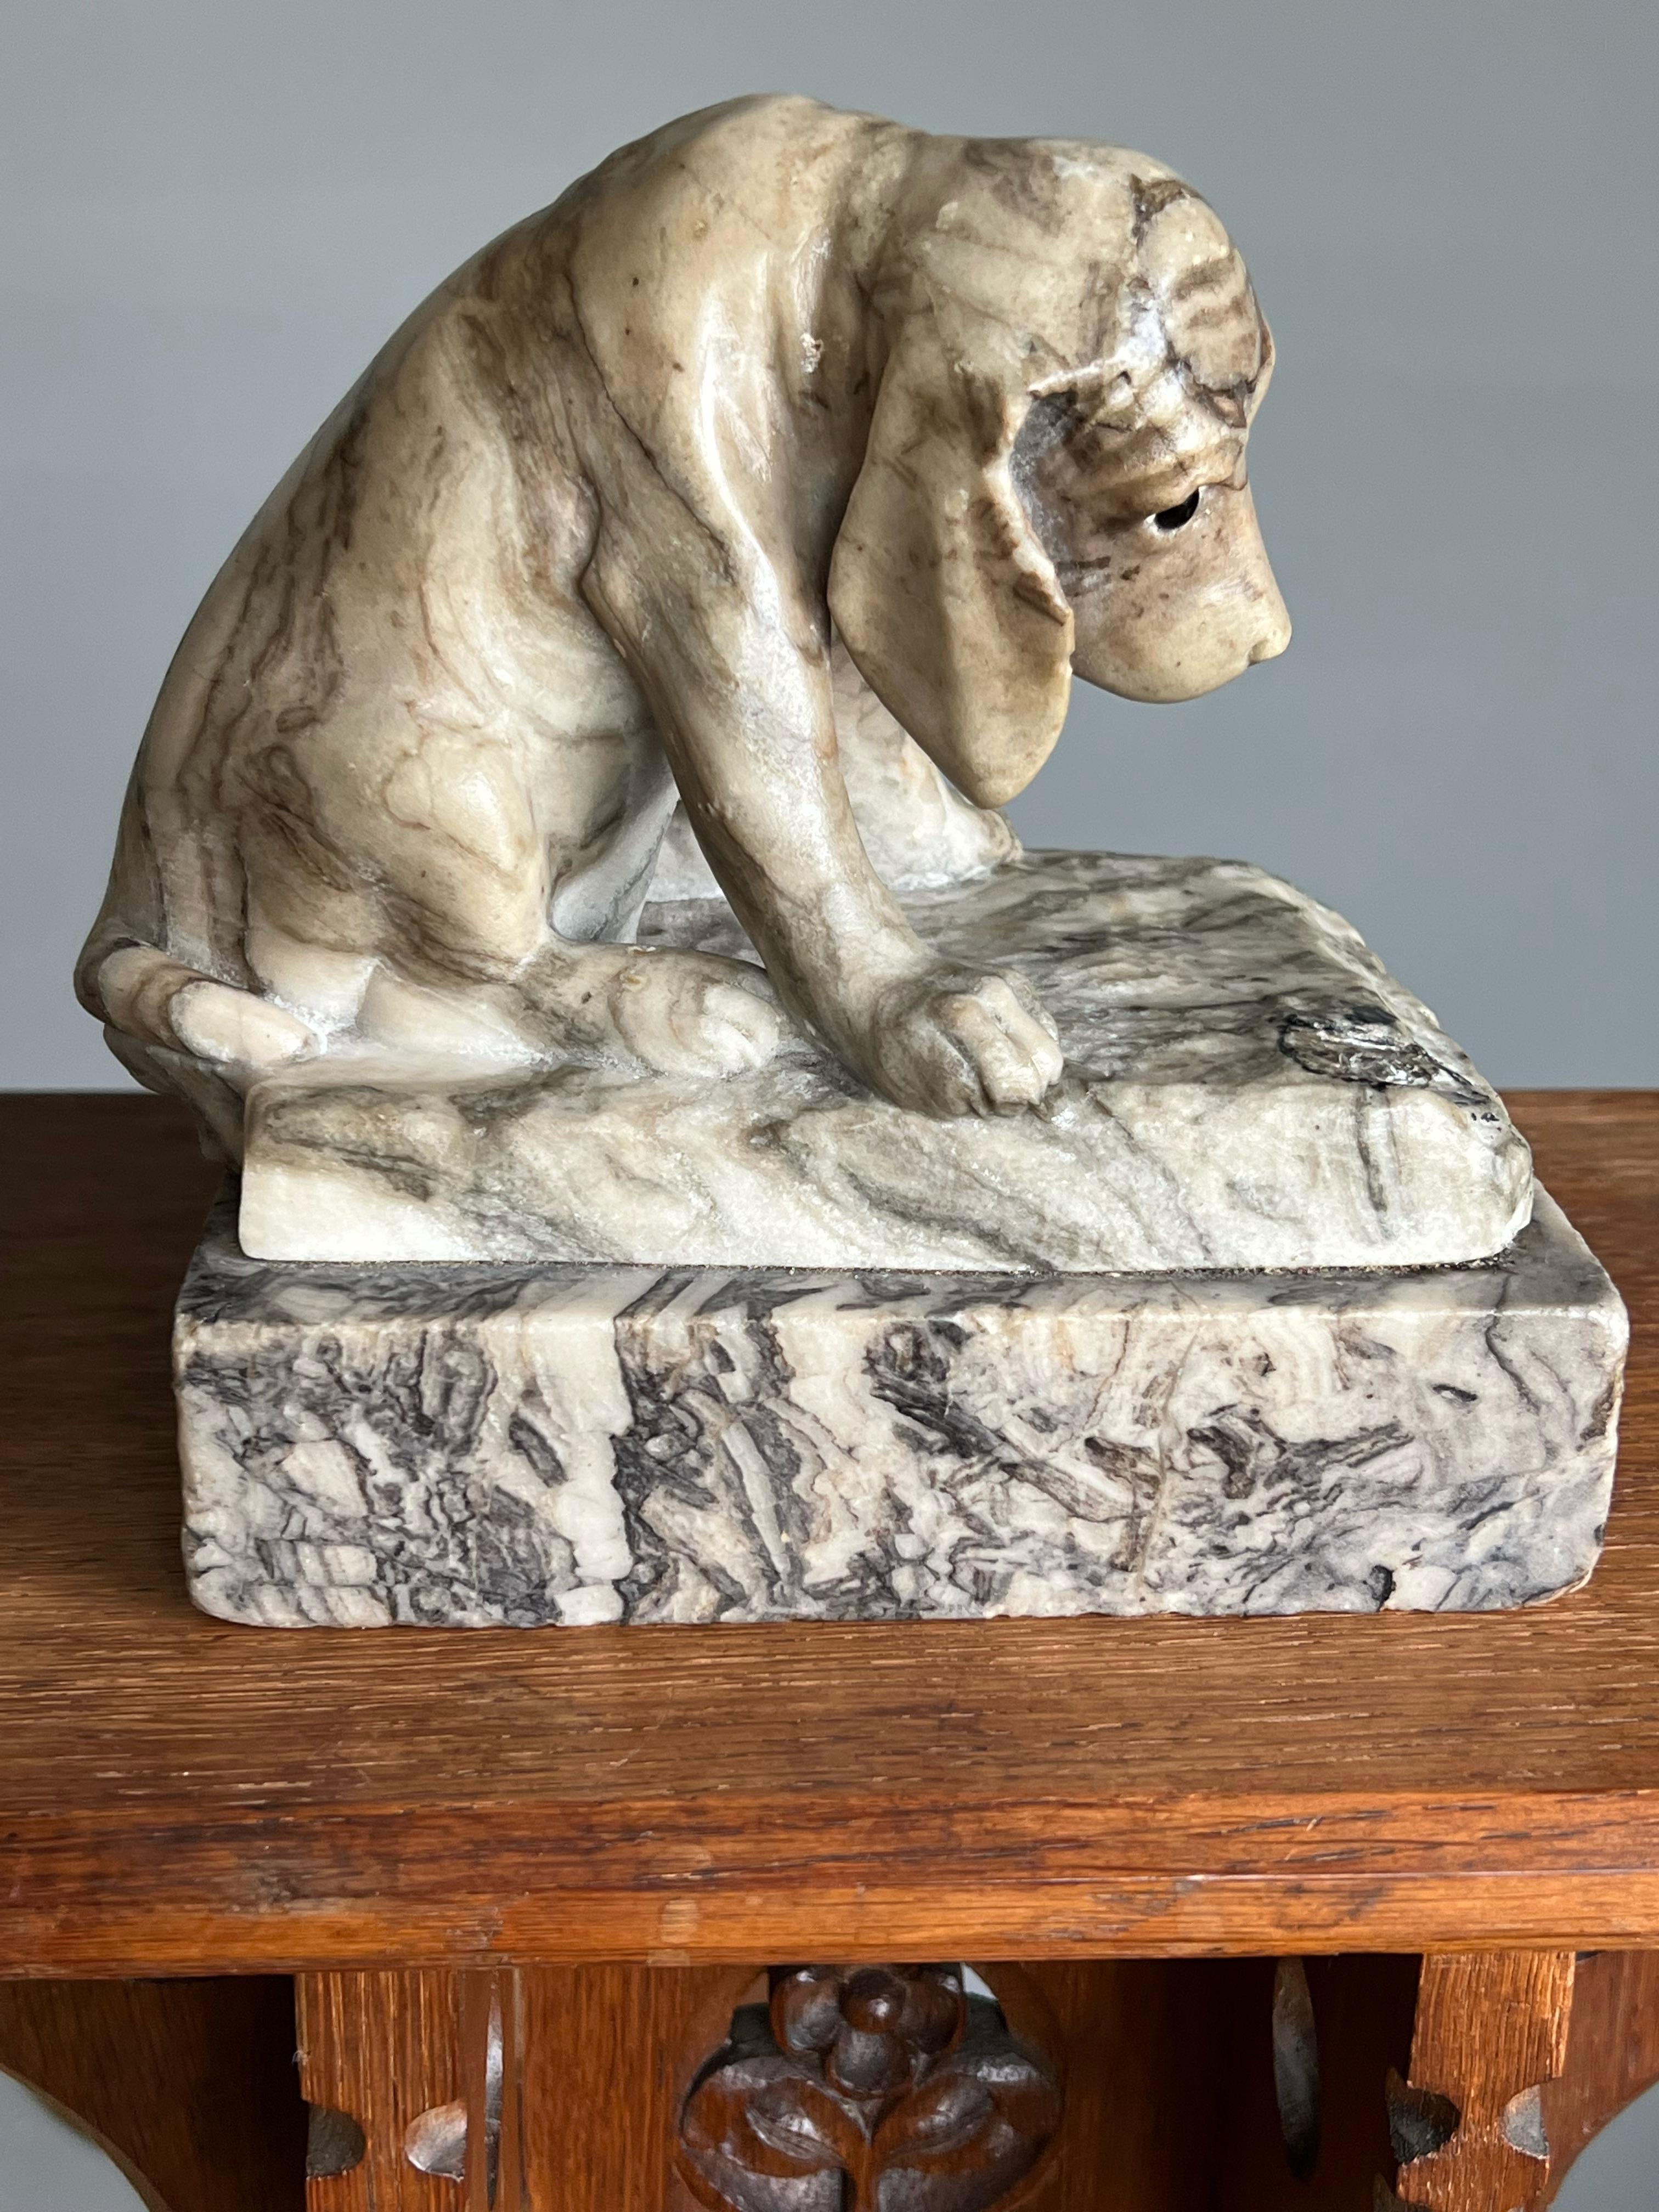 Marvelous and signed, sitting puppy dog sculpture with glass eyes.

This stunning alabaster puppy sculpture is another one of our recent great finds. If you have an eye for top quality hand-crafted sculptures of animals in general and of dogs in